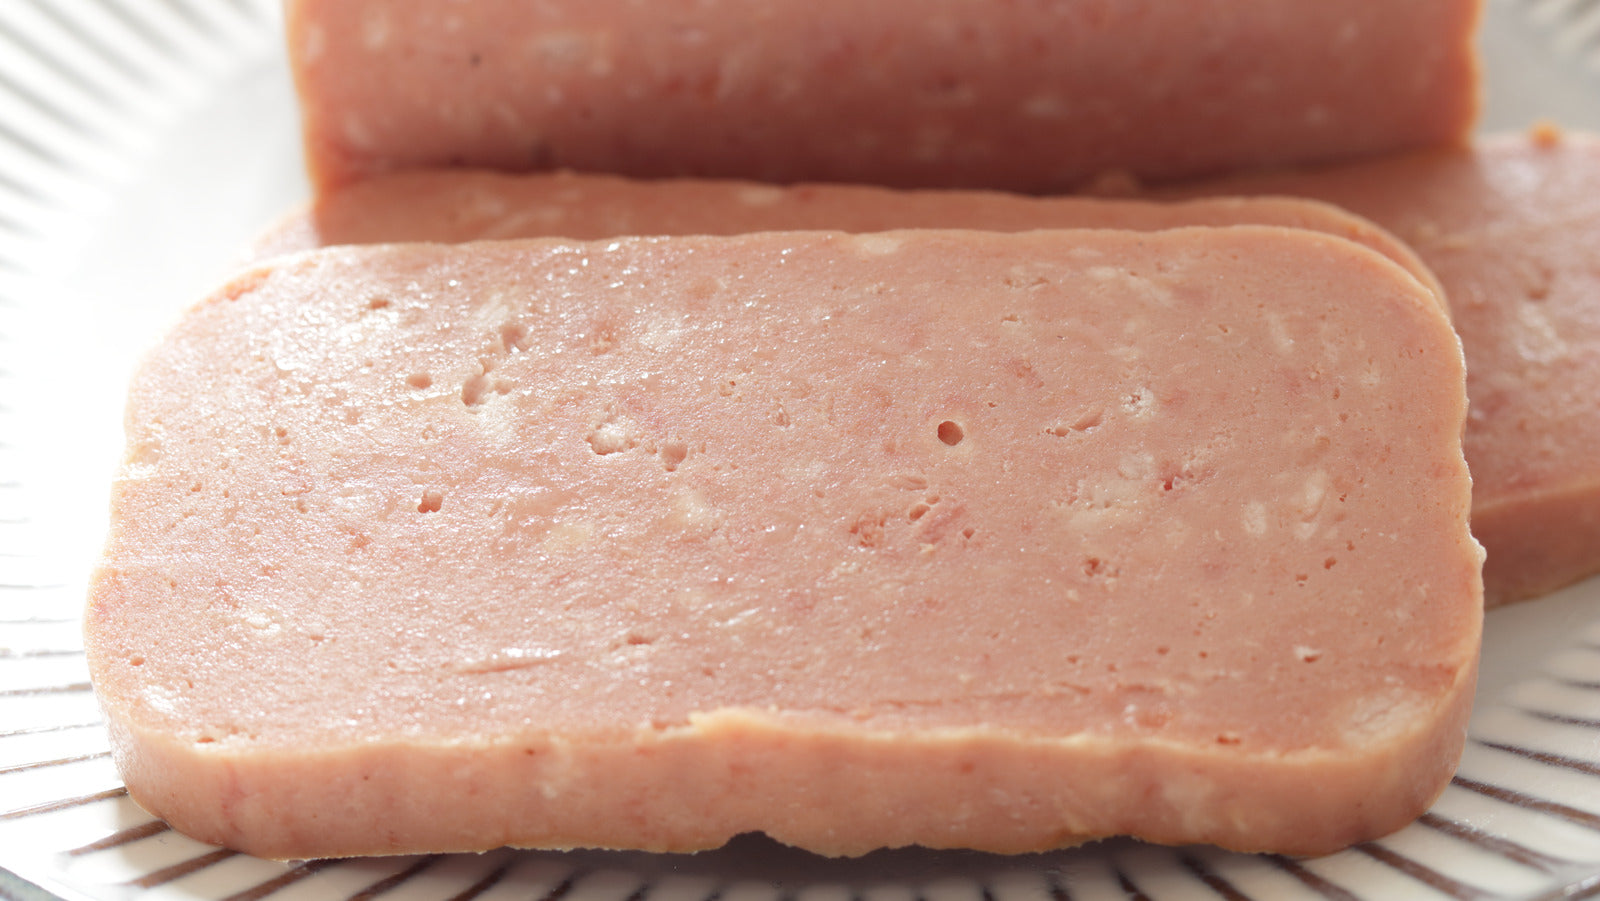 Spam Vs Corned Beef: What's The Difference?